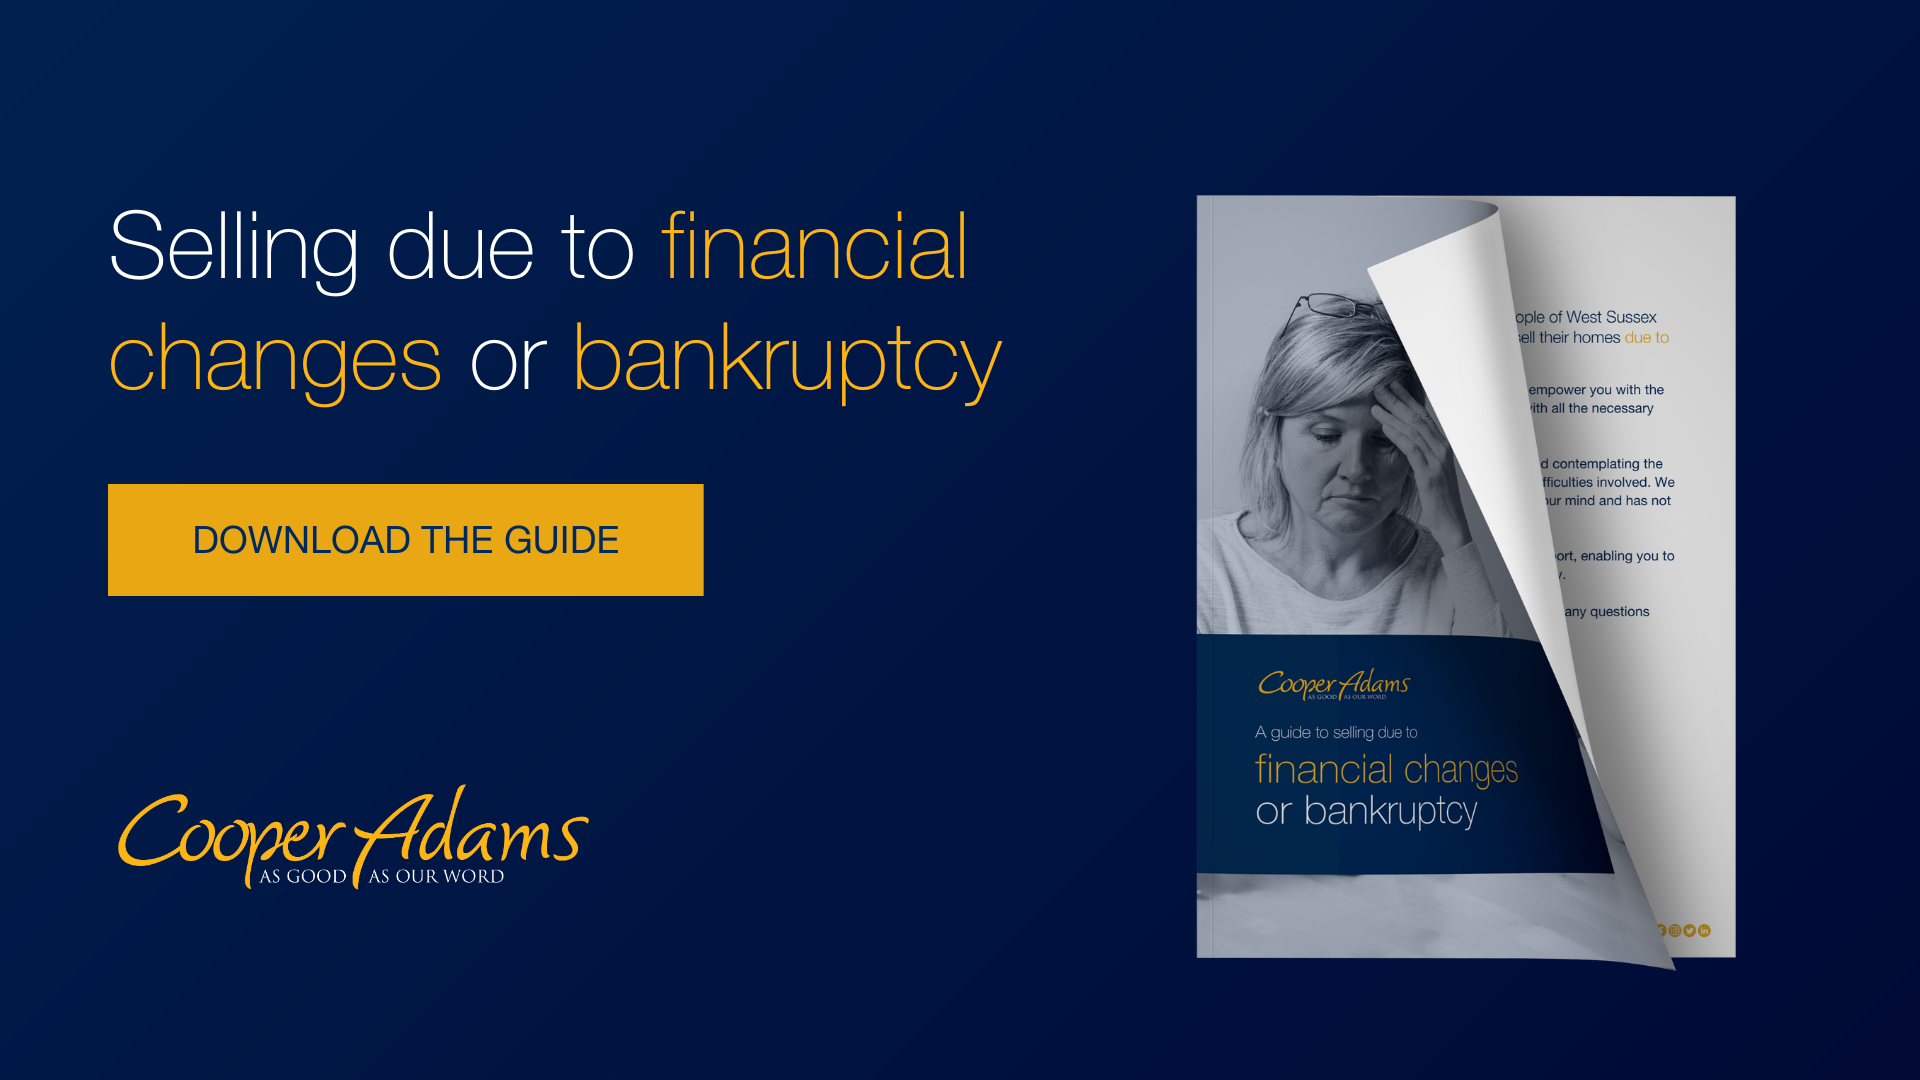 Download our guide to selling due to financial challenges or bankruptcy